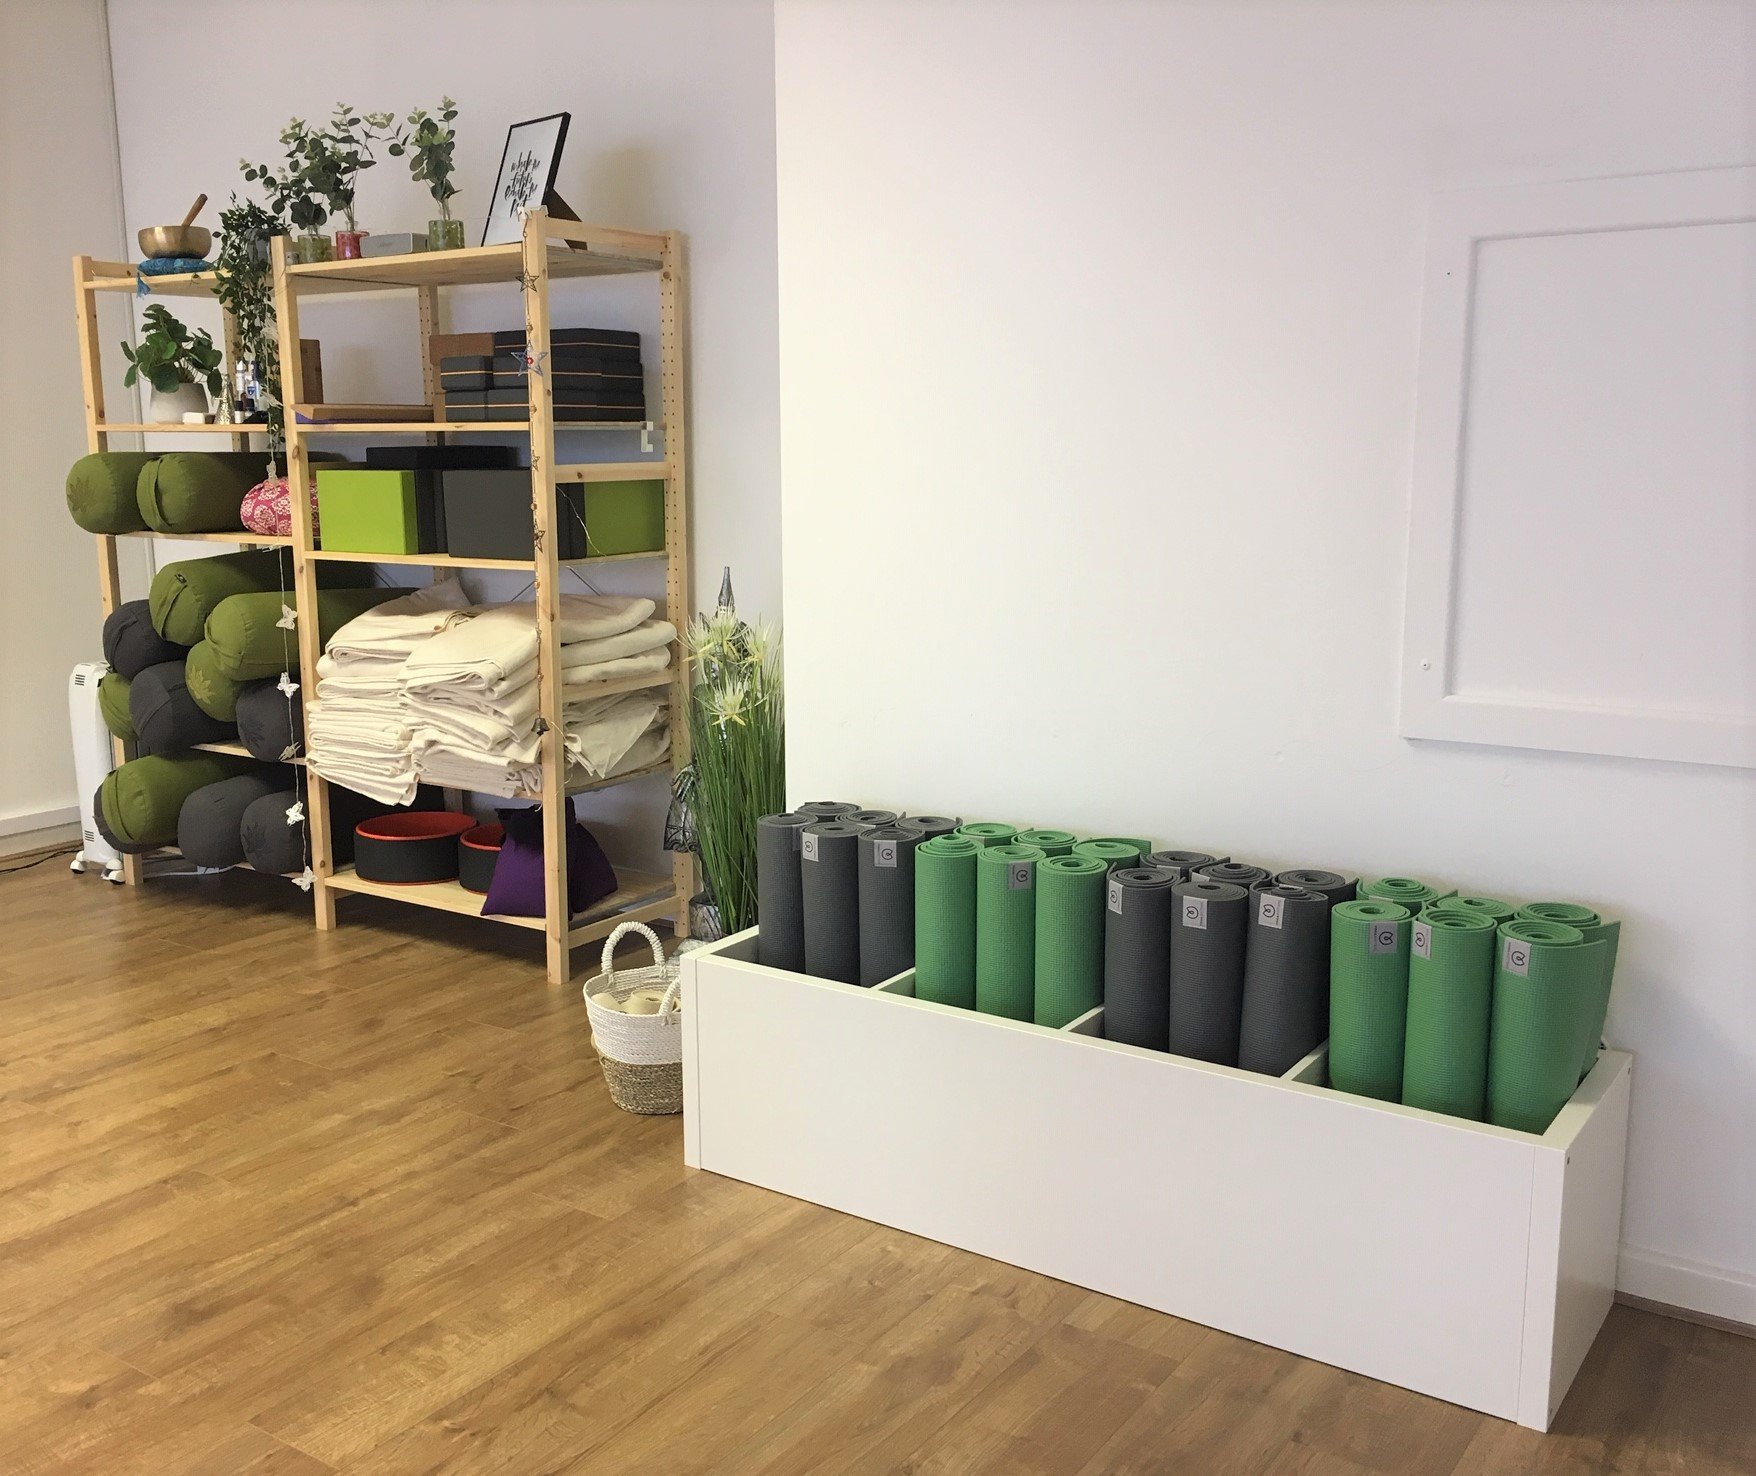 Our yoga studio in Stockport is available to hire - rates